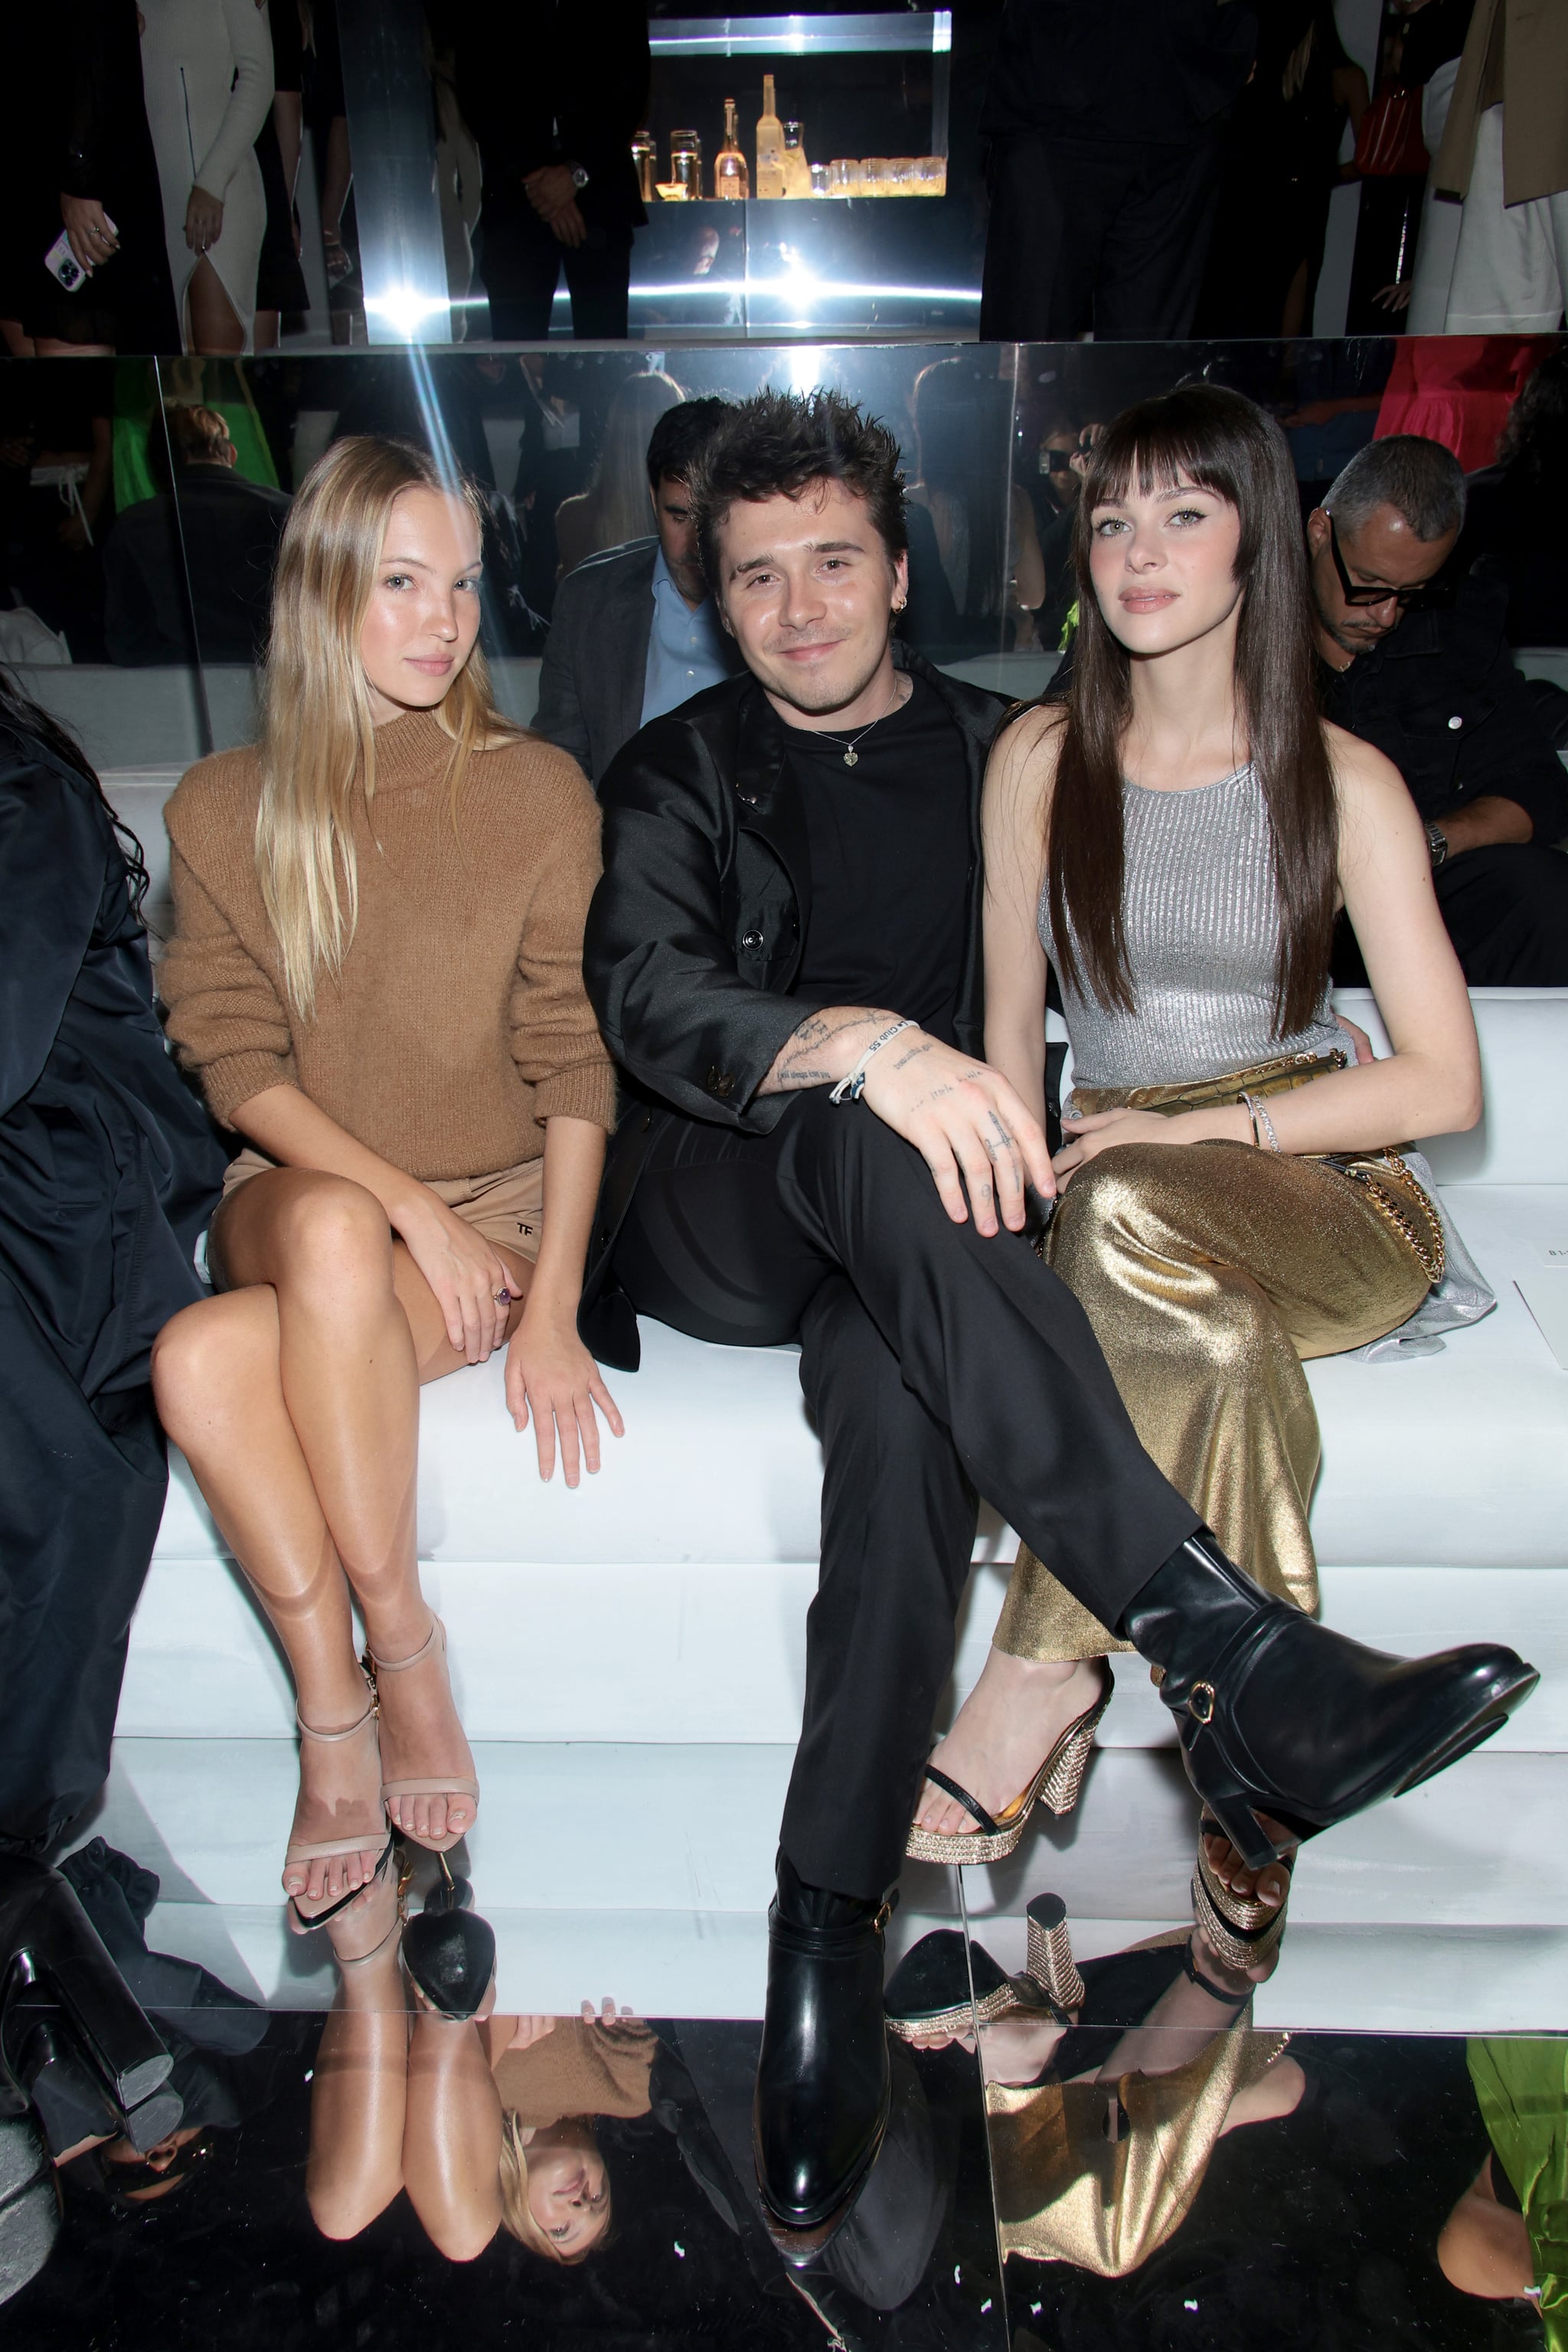 NEW YORK, NEW YORK - SEPTEMBER 14: Lila Grace Moss Hack, Brooklyn Beckham and Nicola Peltz attend the Tom Ford fashion show during September 2022 New York Fashion Week: The Shows at Skylight on Vesey on September 14, 2022 in New York City. (Photo by Dimitrios Kambouris/Getty Images for NYFW: The Shows )